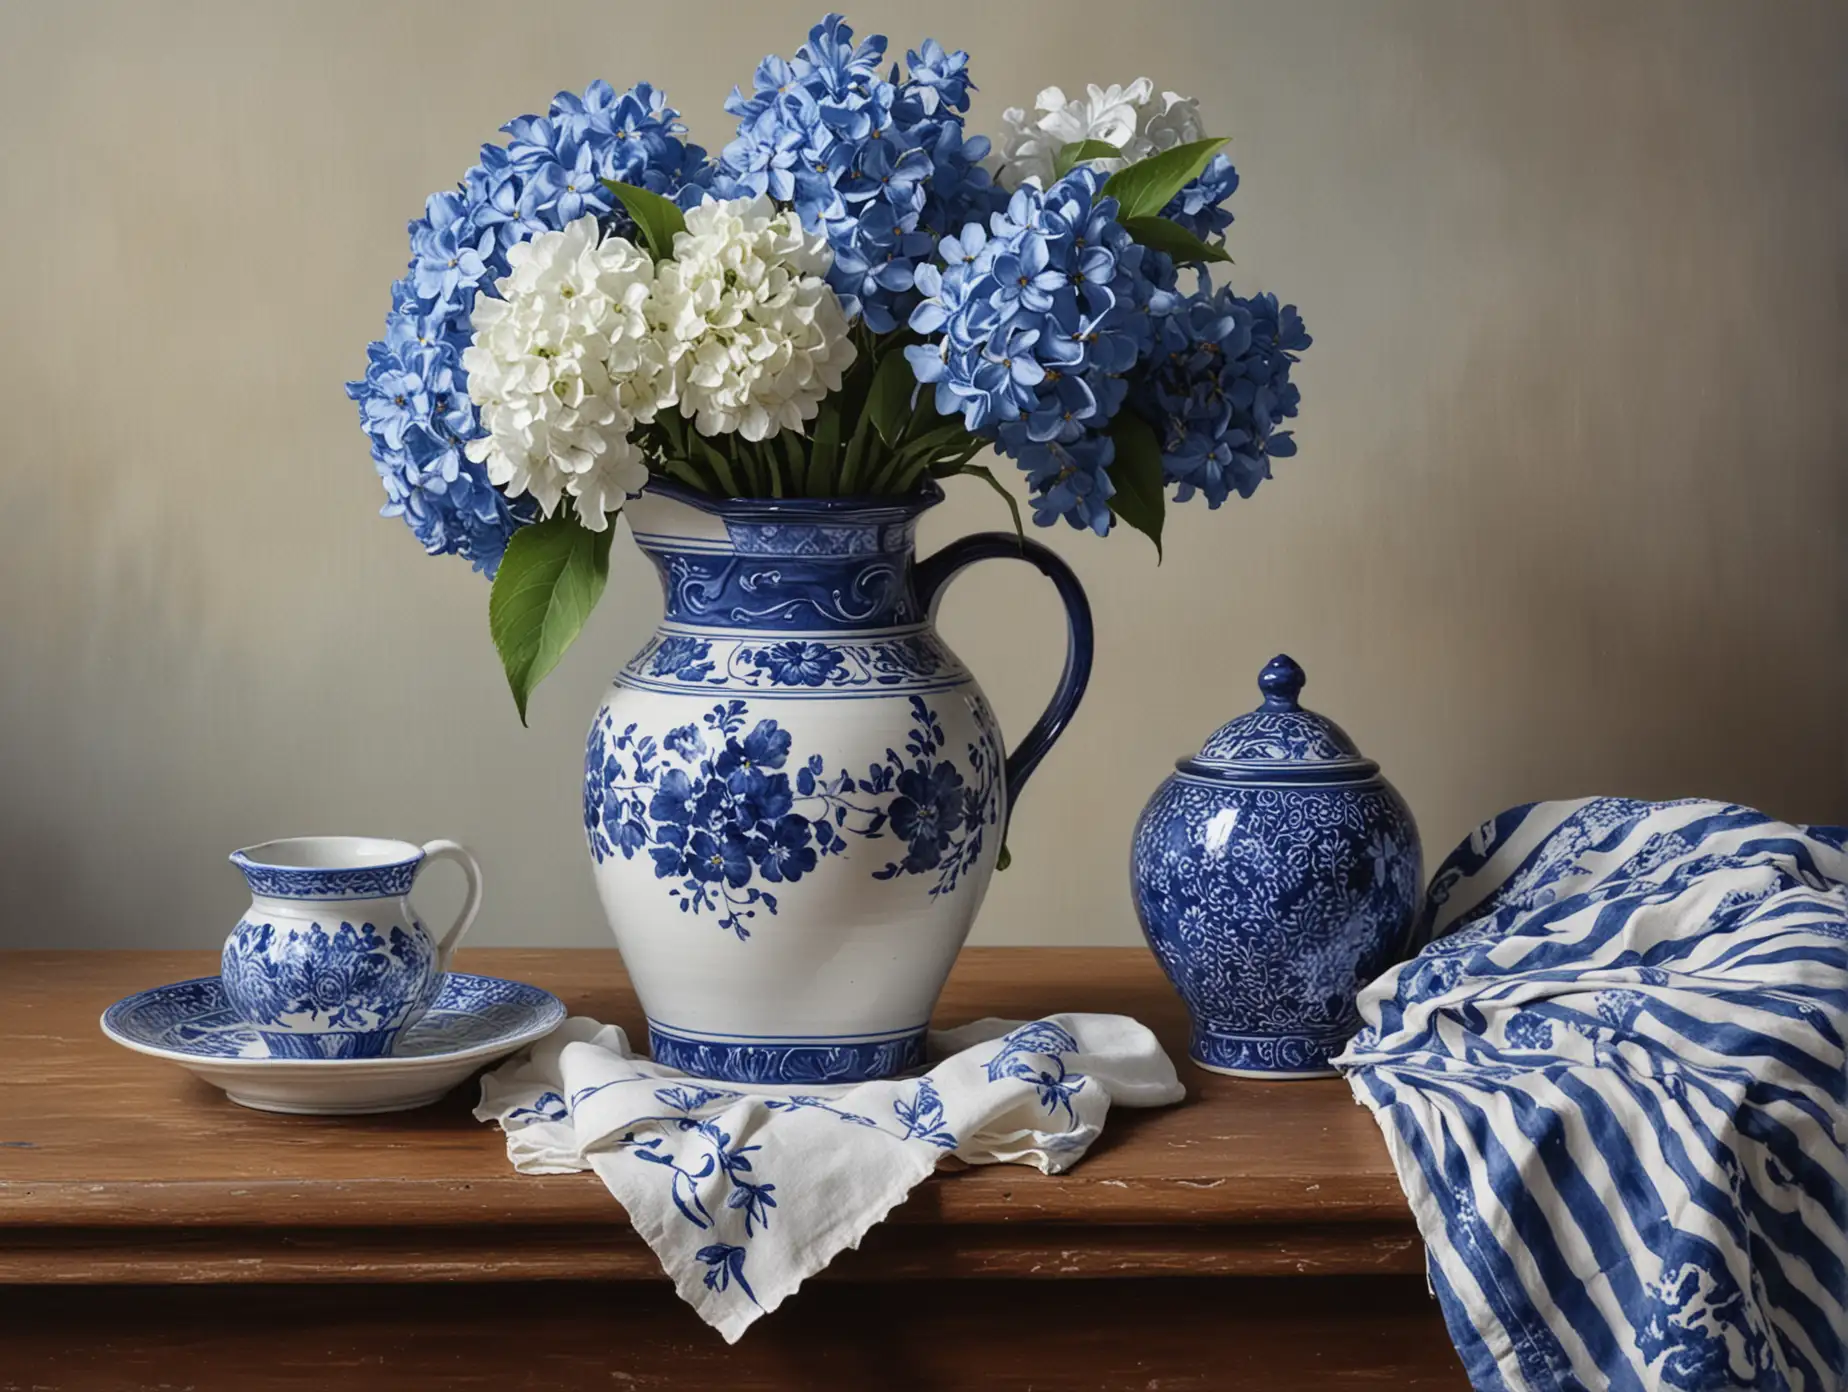 A STILL LIFE PAINTING OF A BLUE AND WHITE PITCHER WITH BLUE HYDRANGES AND A NOTHER SMALL BLUE AND WHITE PIECE OF POTTERY ON THE TANLE.  SHOW A CLOTH ON THE TABLE